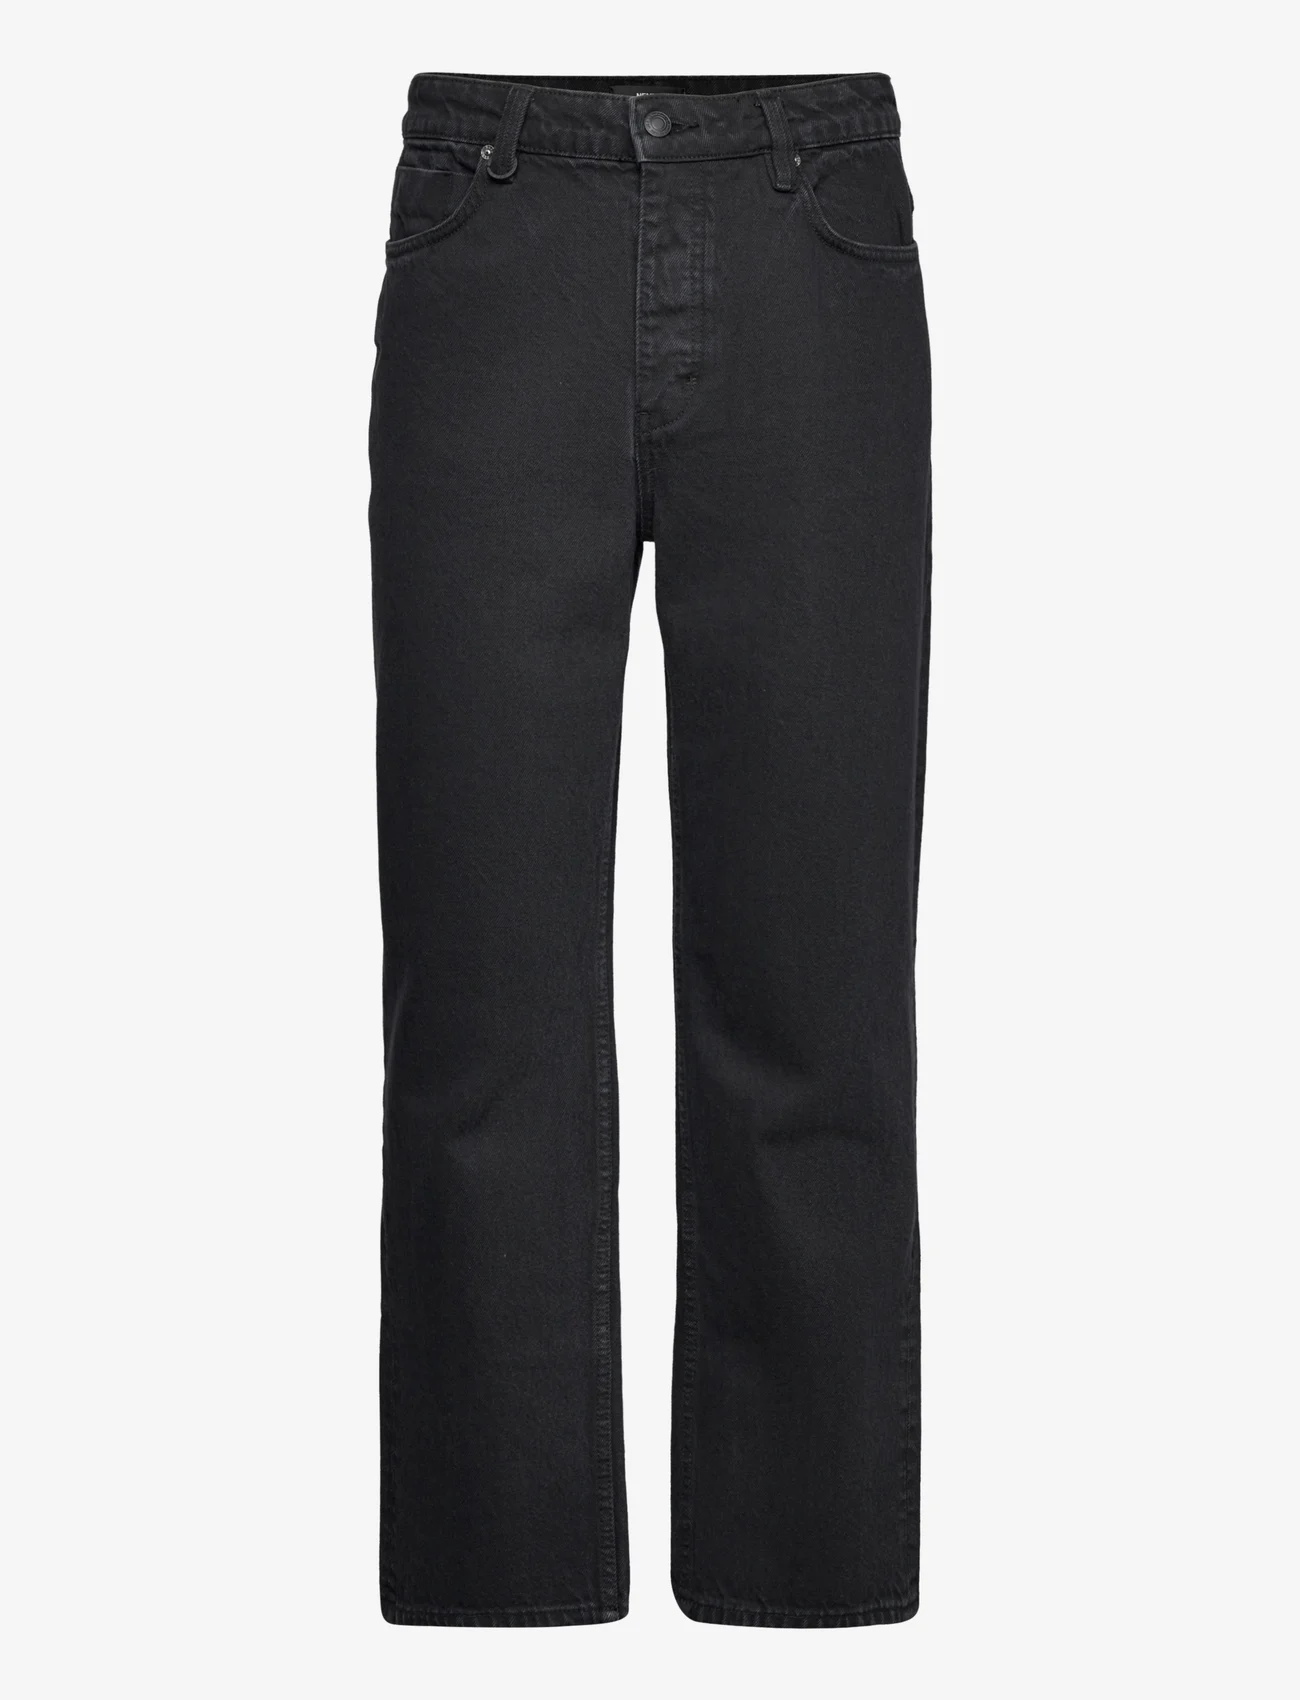 NEUW - LIAM LOOSE - relaxed jeans - vintage black - 0